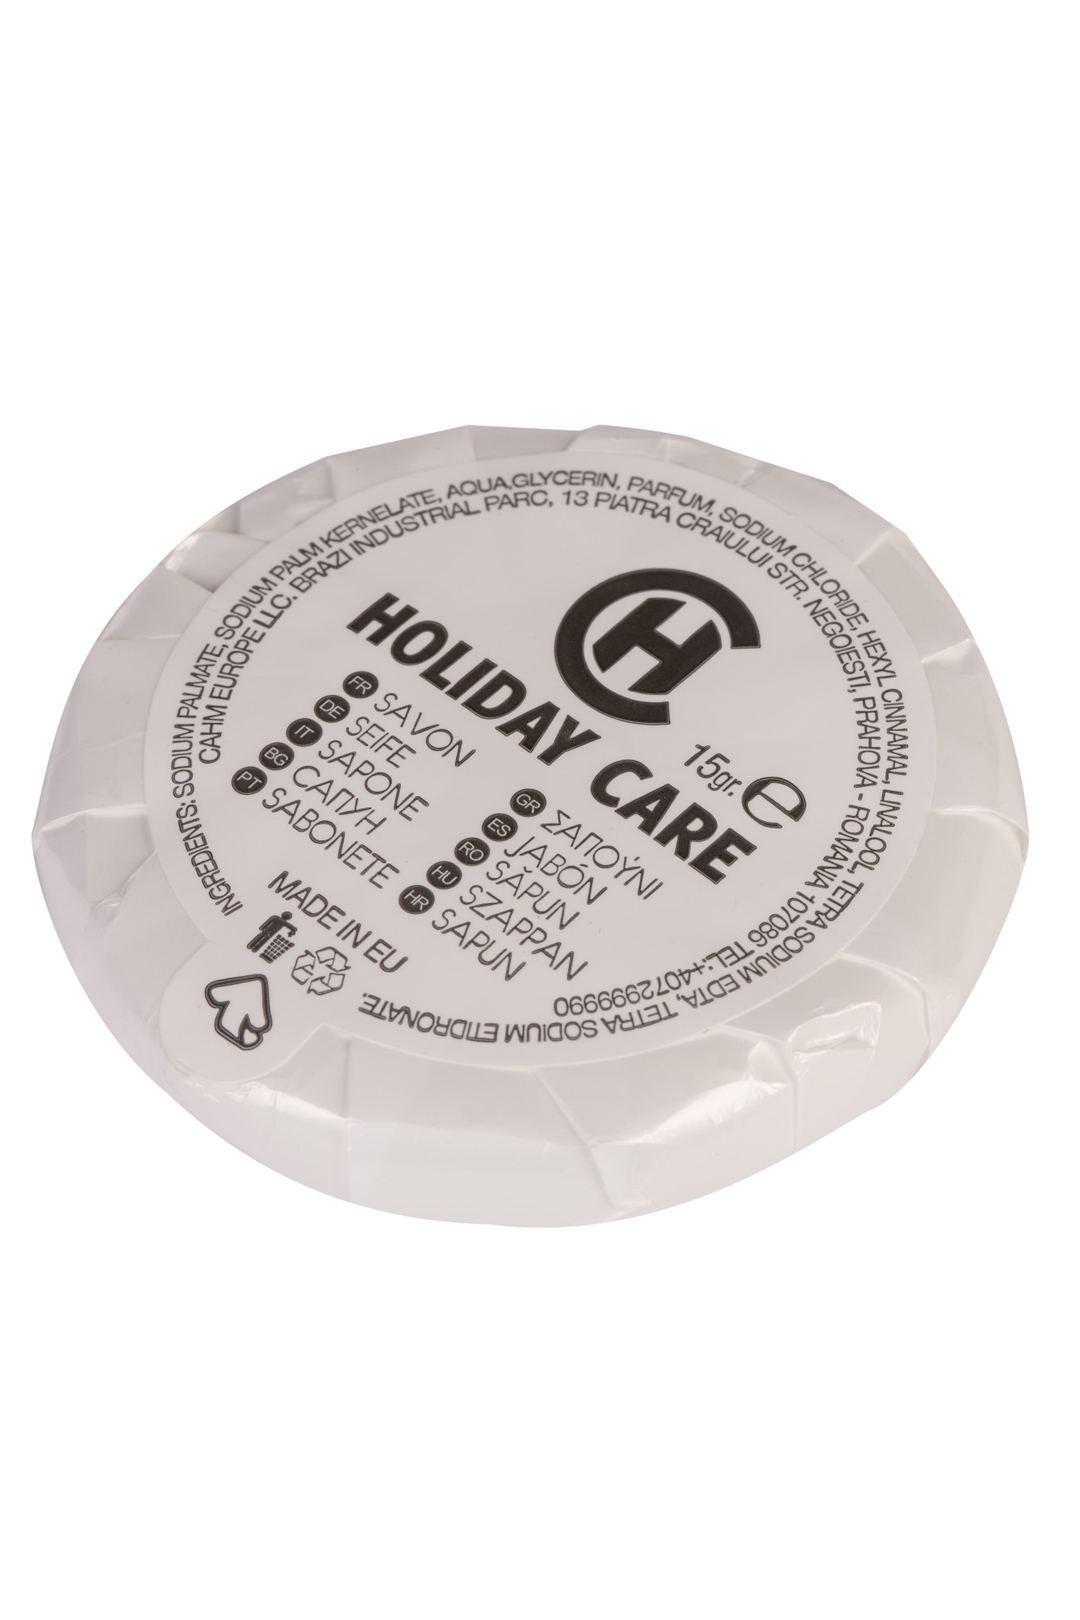 HOLIDAY CARE -SOAP ΣΑΠΟΥΝΙ 15gr 25τεμ.